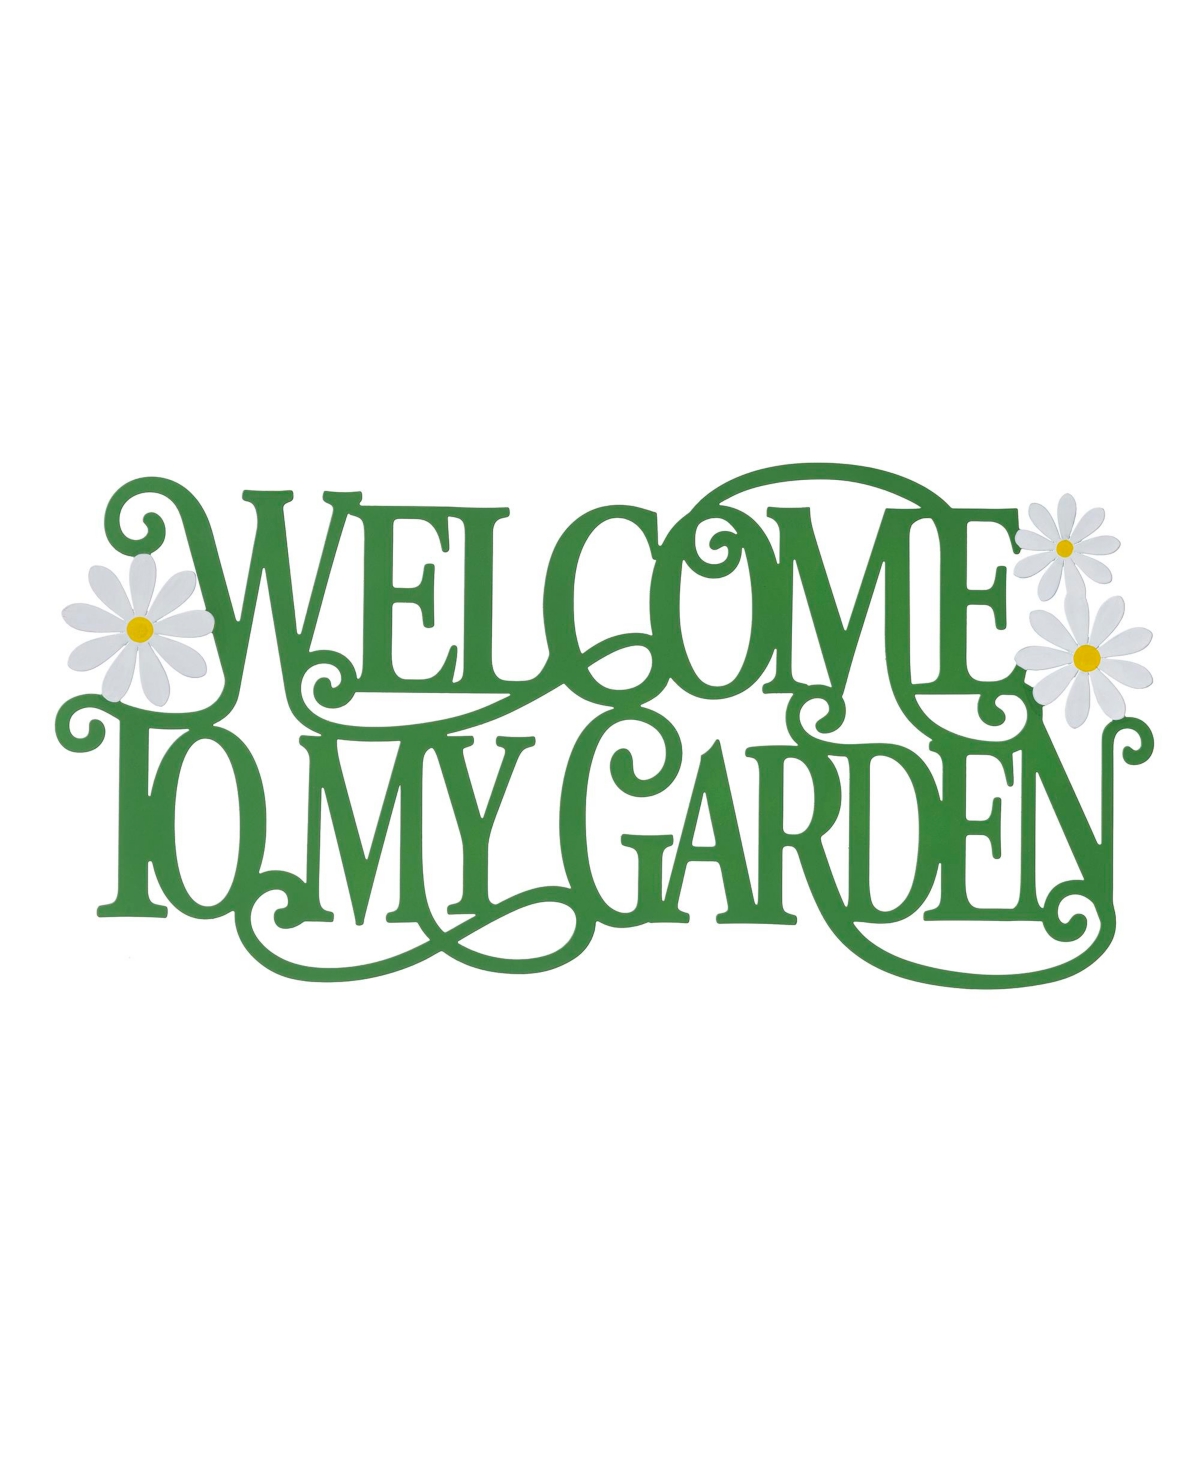 24" L Metal Cutout "Welcome to My Garden" Wall Decor - Green